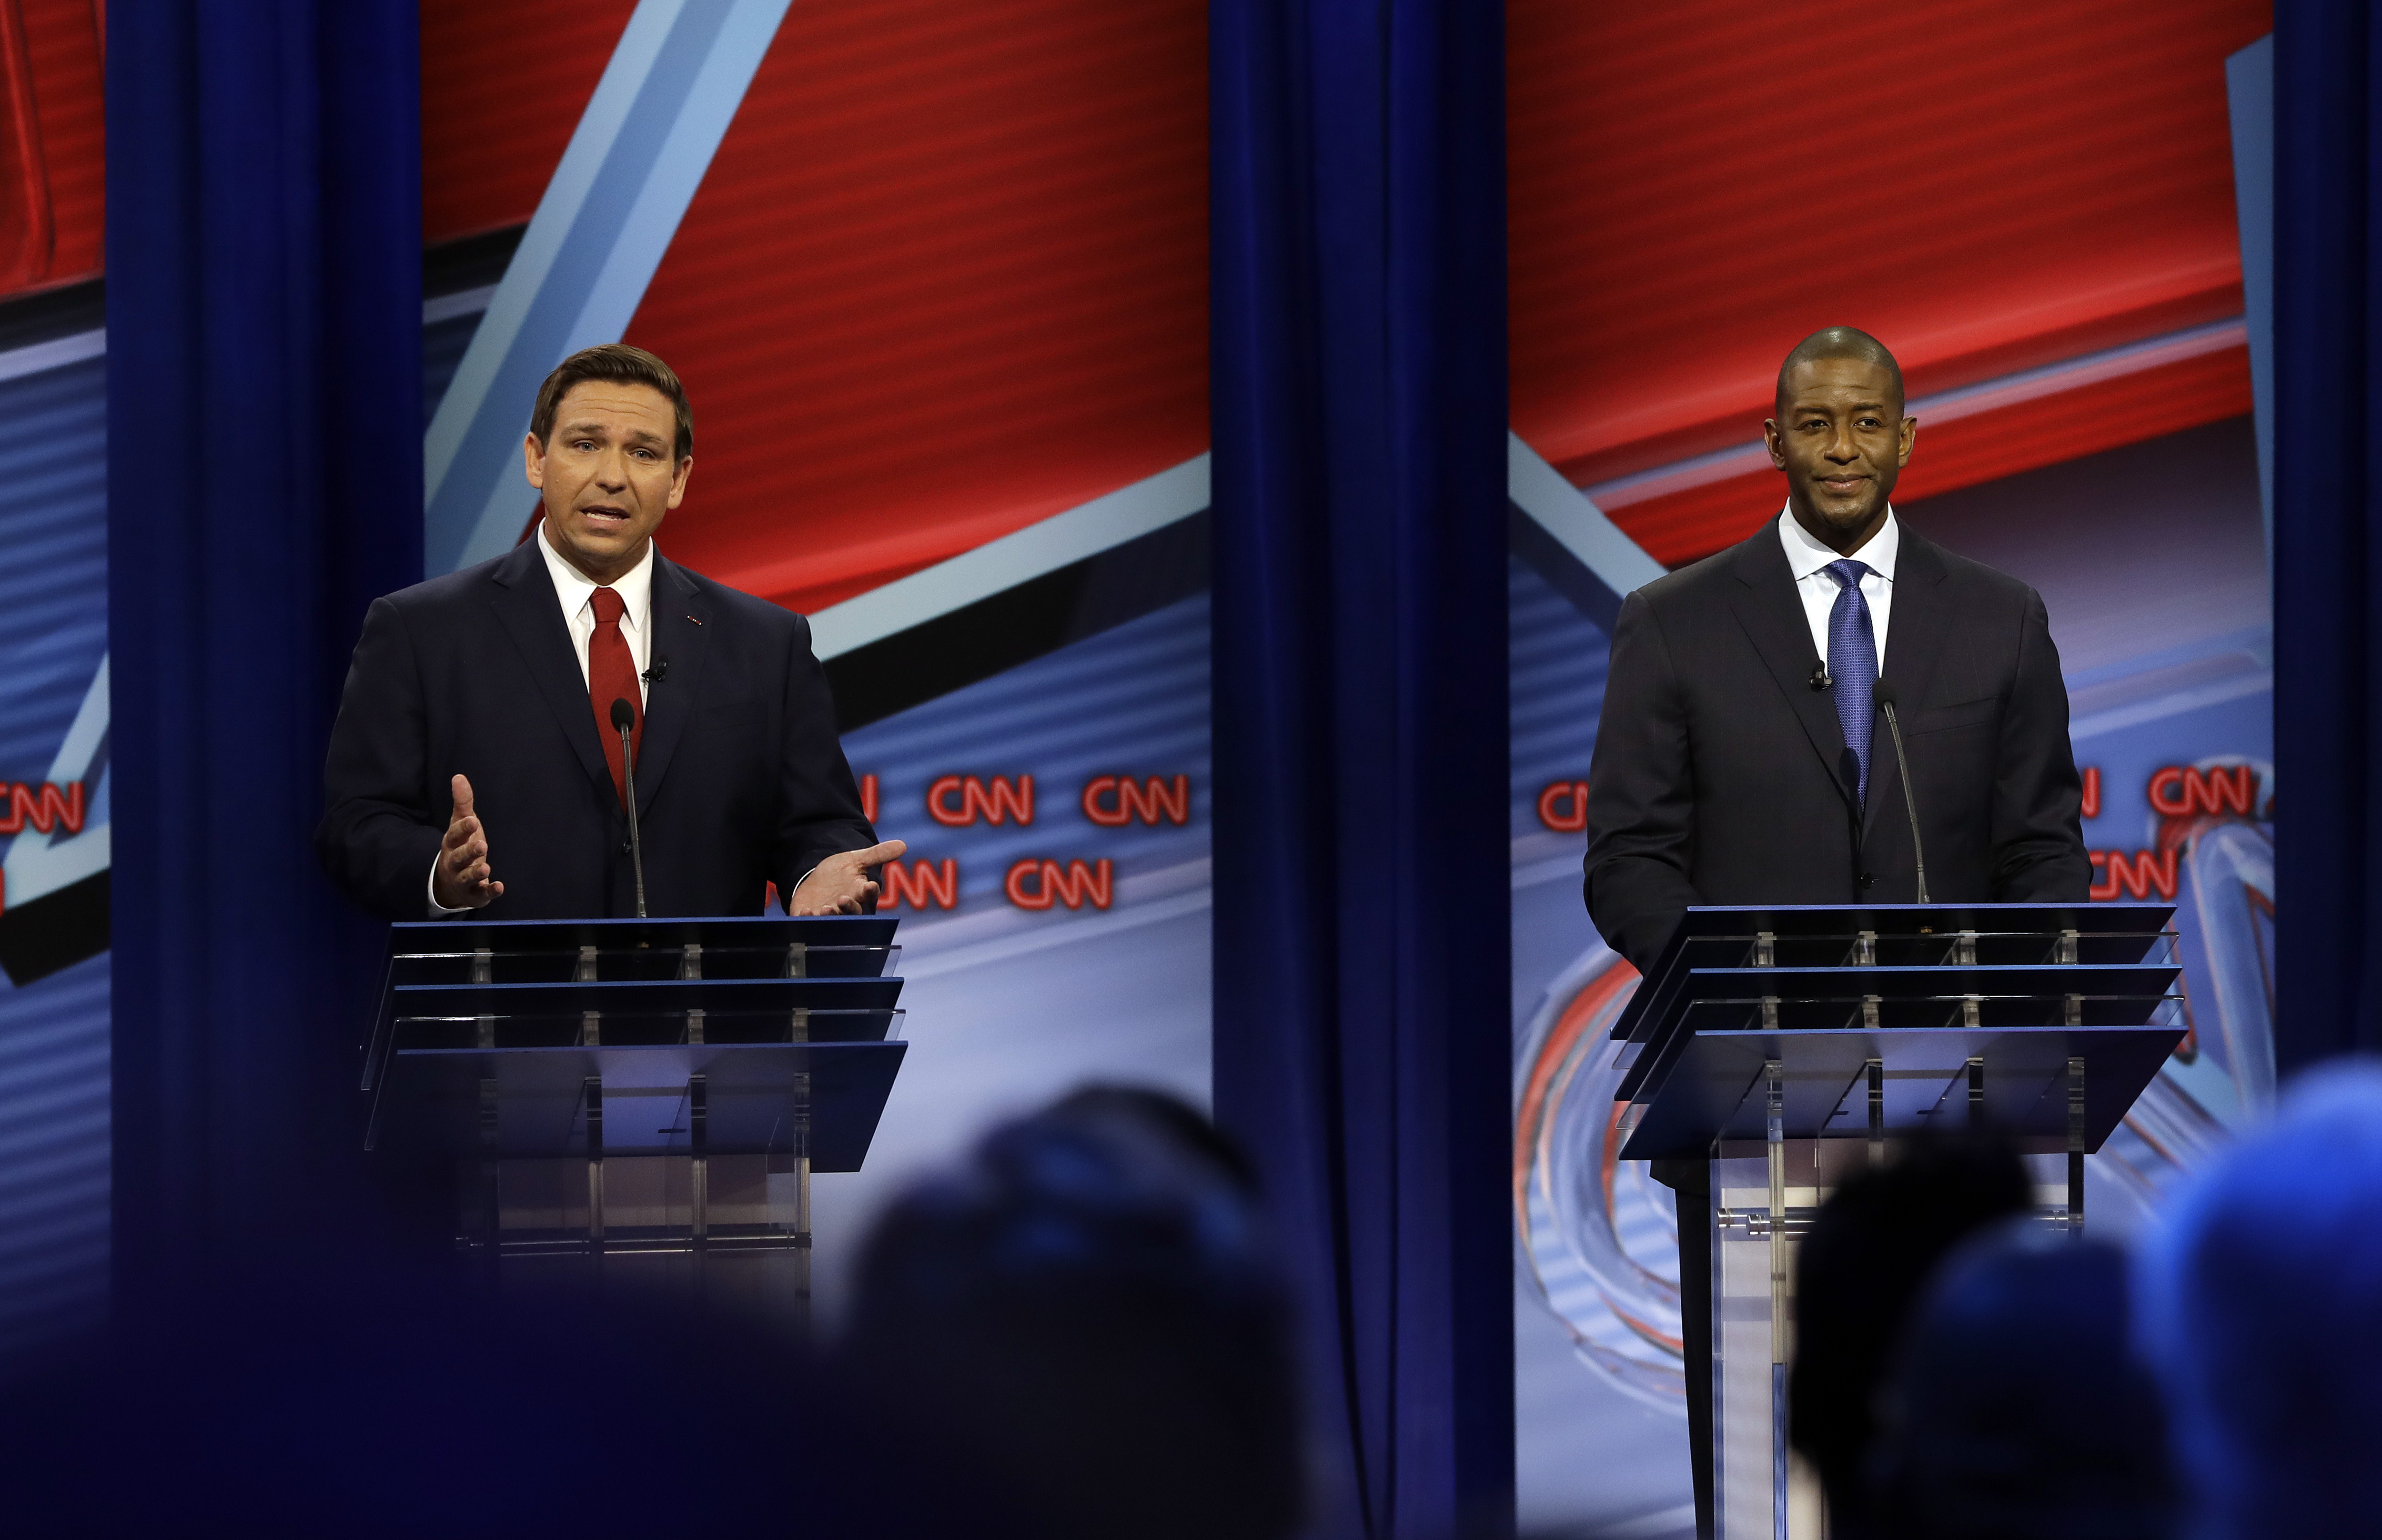 TAMPA, FLORIDA - OCTOBER 21: Florida Republican gubernatorial candidate Ron DeSantis, left, speaks about his Democratic opponent Andrew Gillum during a CNN debate, Sunday, Oct. 21, 2018, in Tampa, Fla. (Photo by Chris O'Meara-Pool/Getty Images)